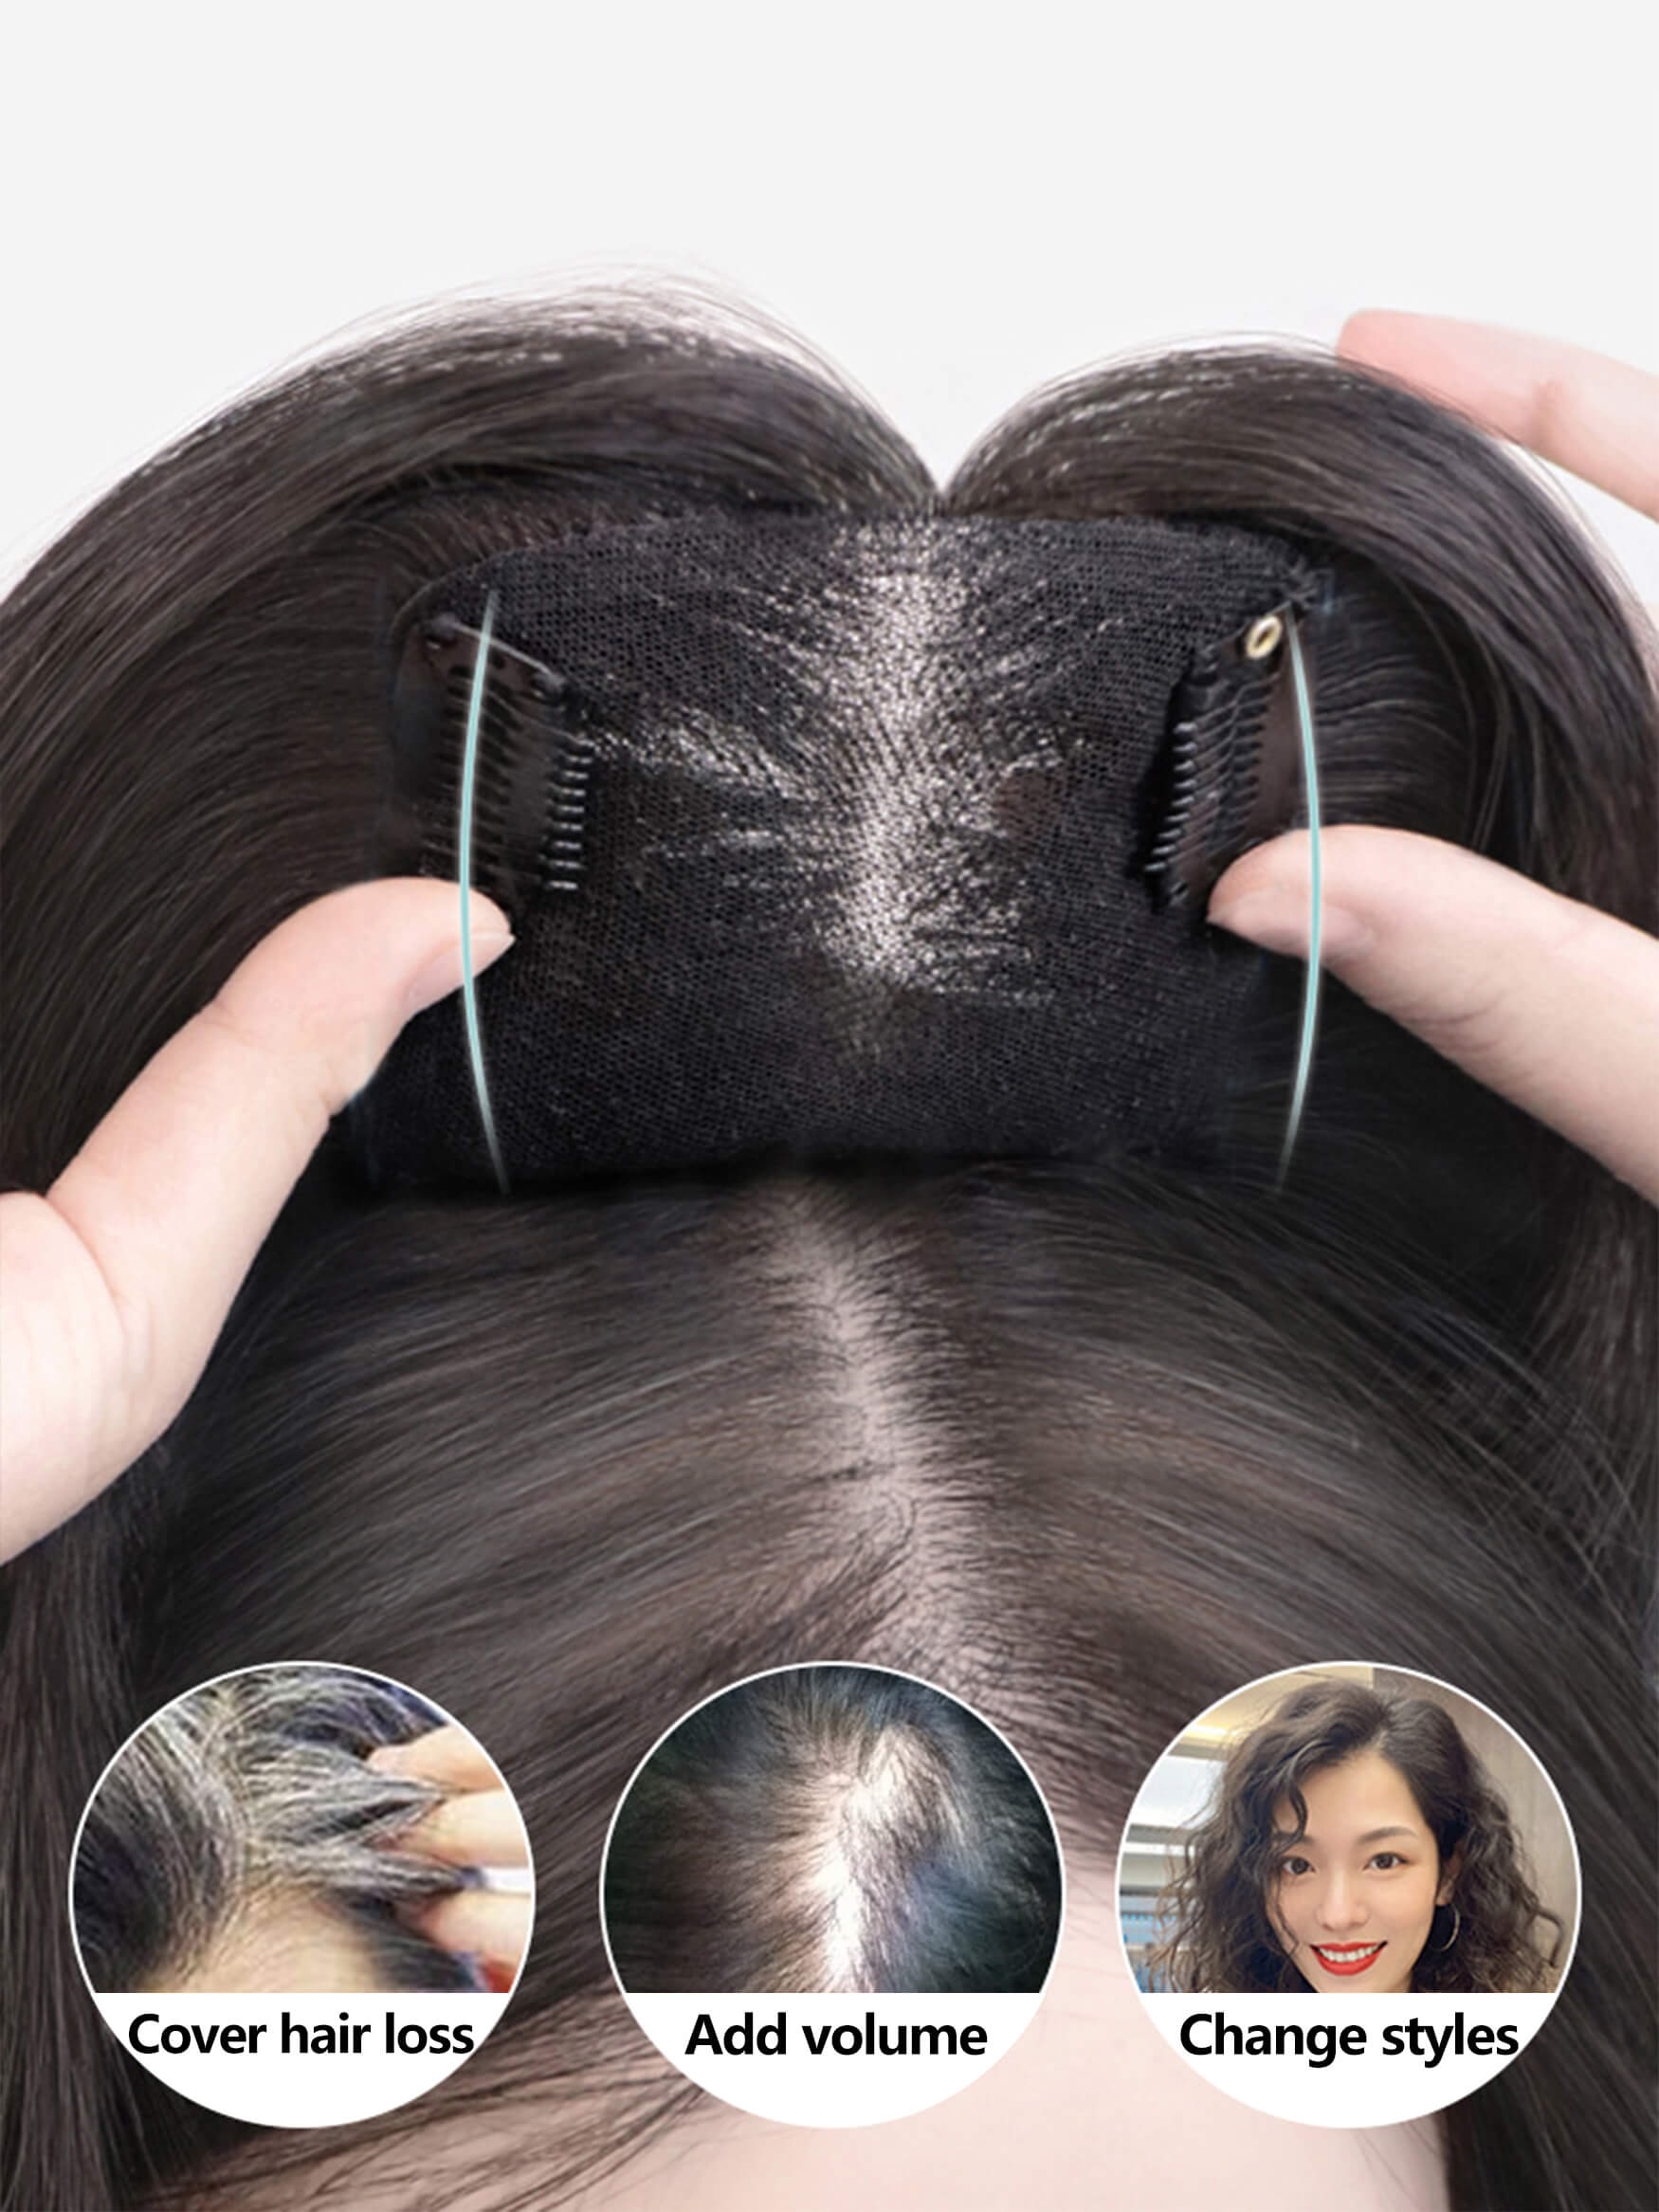 Loose Wavy Human Hair Toppers By imwigs®